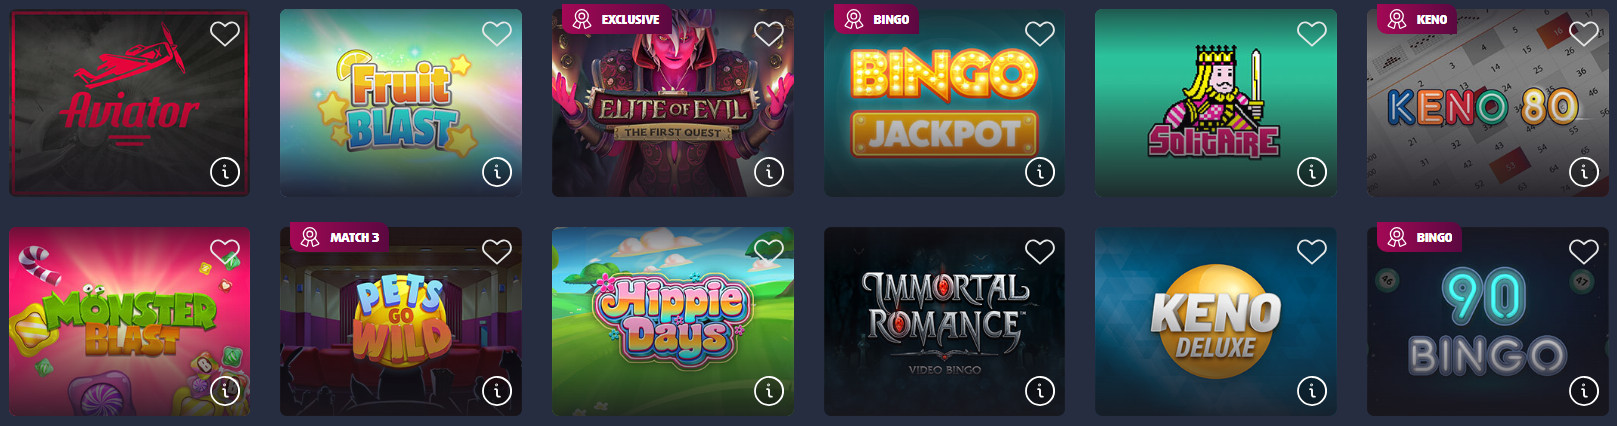 Special Games Section at Lottoland Casino